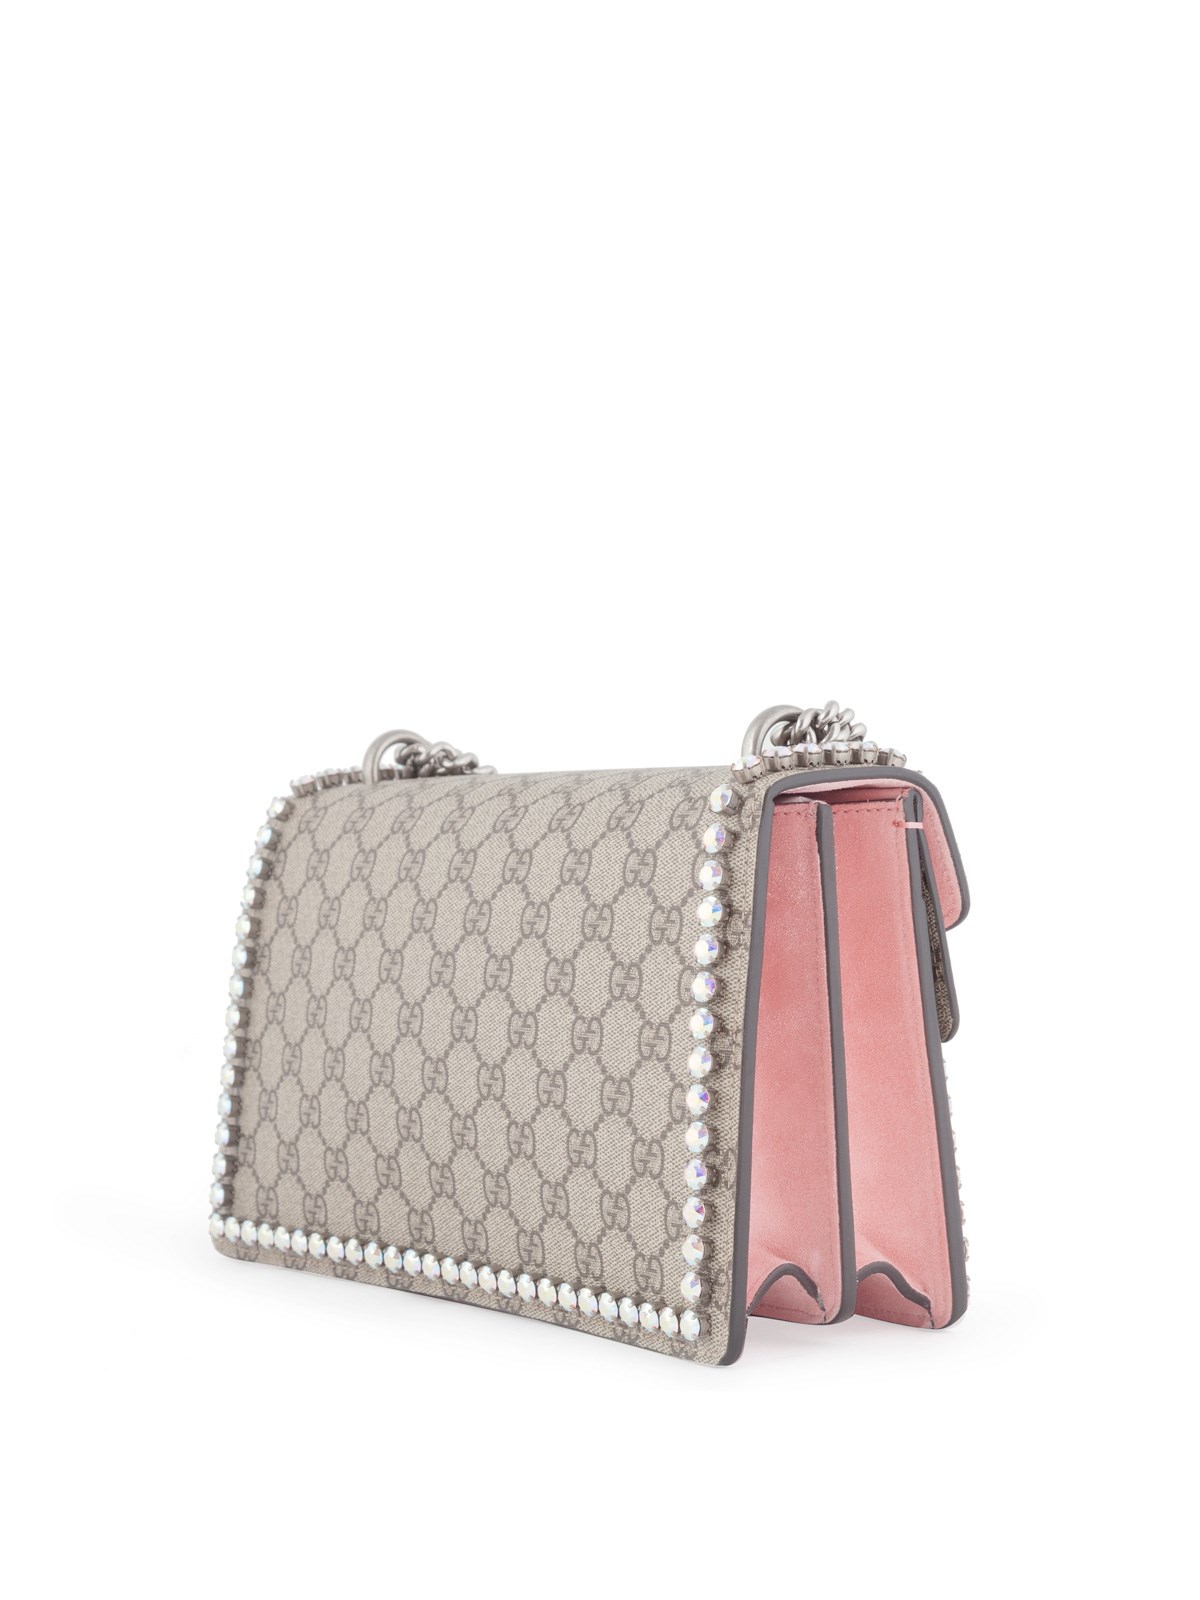 gucci DIONYSUS GG SUPREME SHOULDER BAG WITH CRYSTALS available on 0 - 20872